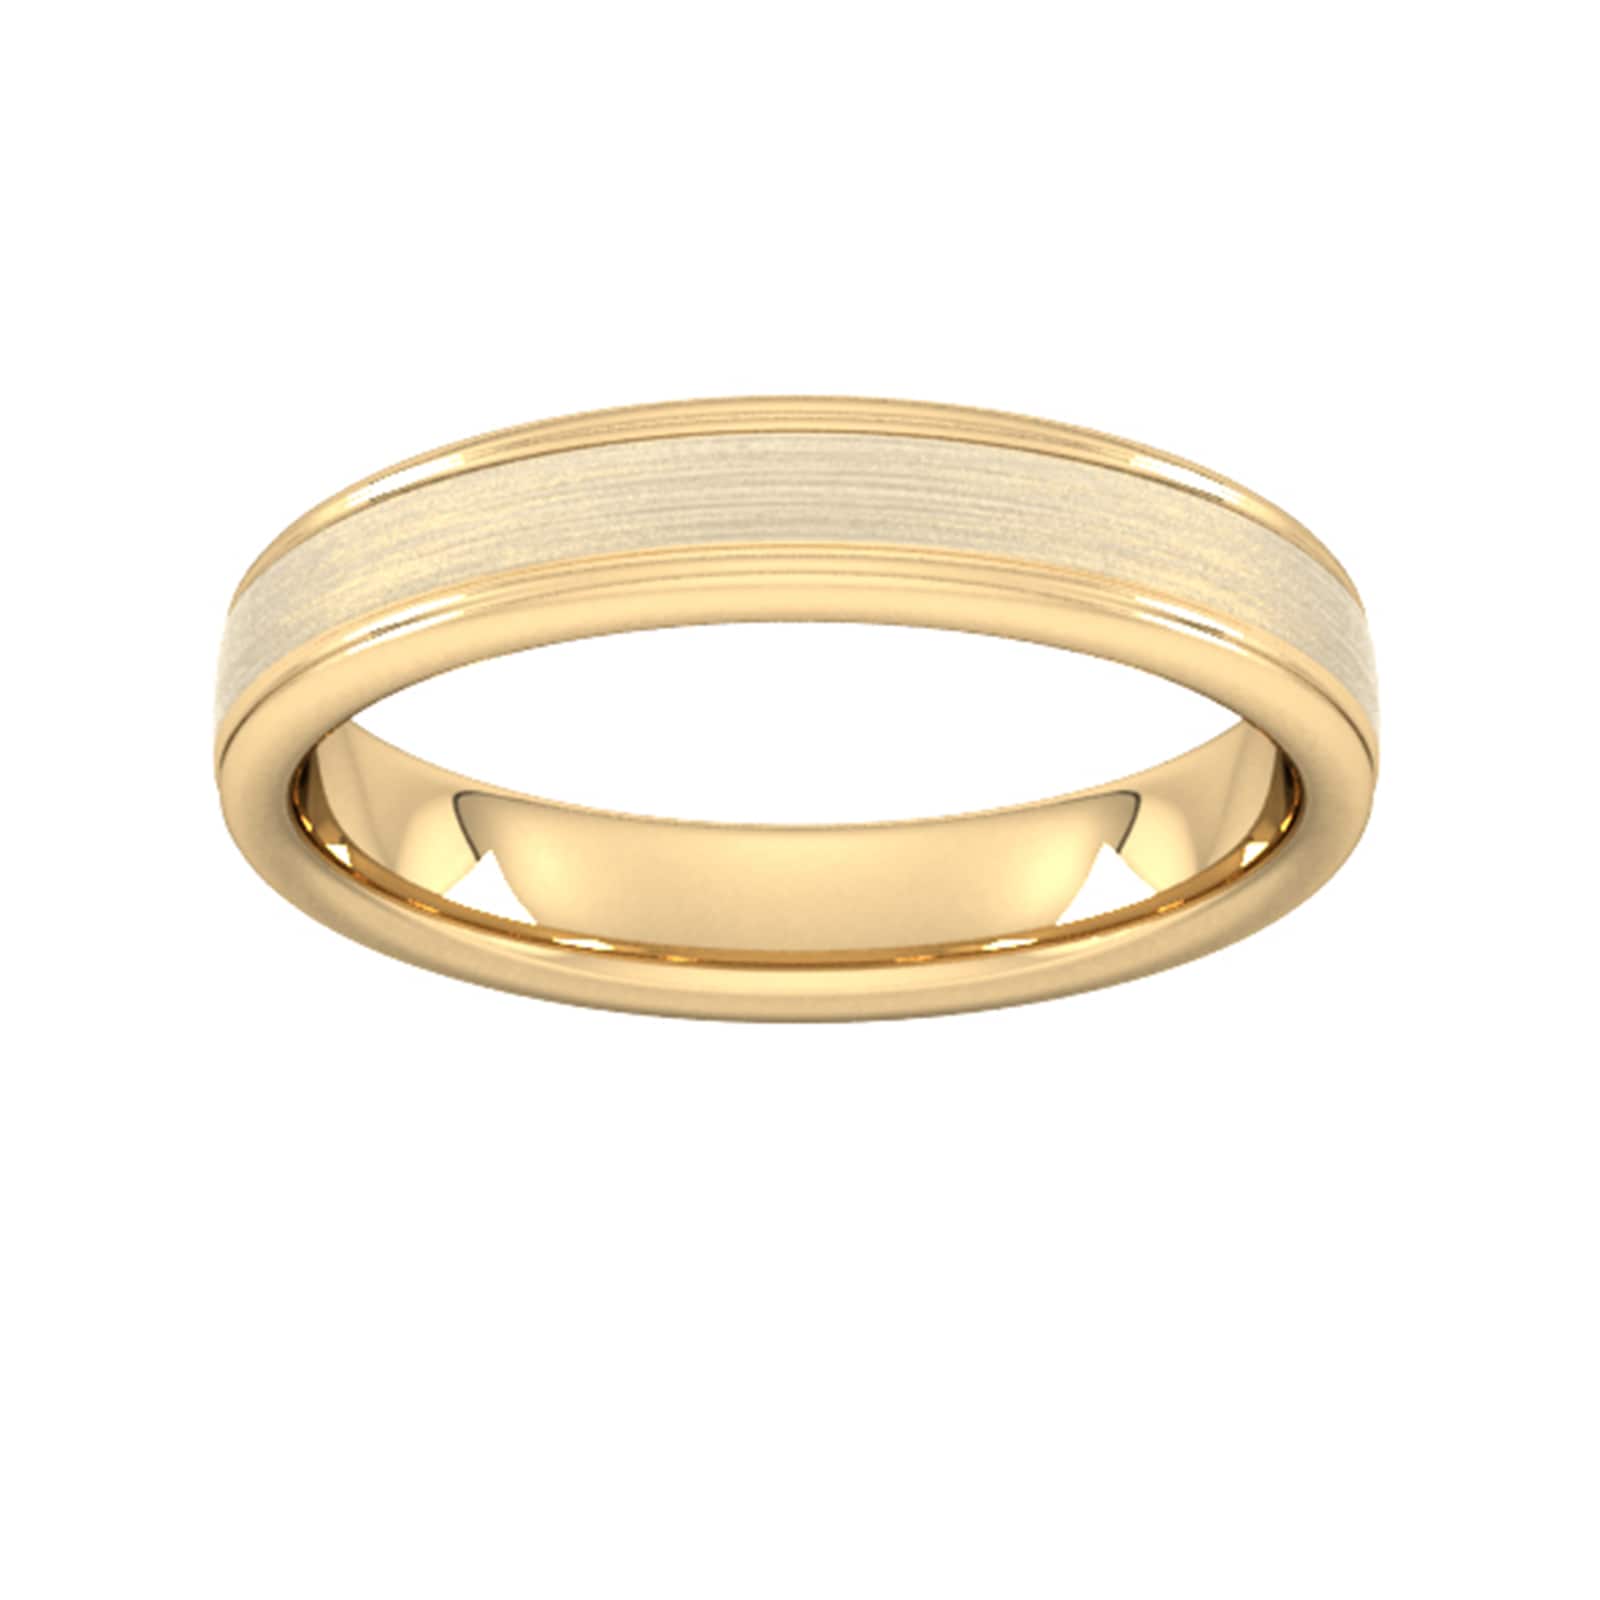 4mm Slight Court Heavy Matt Centre With Grooves Wedding Ring In 18 Carat Yellow Gold - Ring Size J